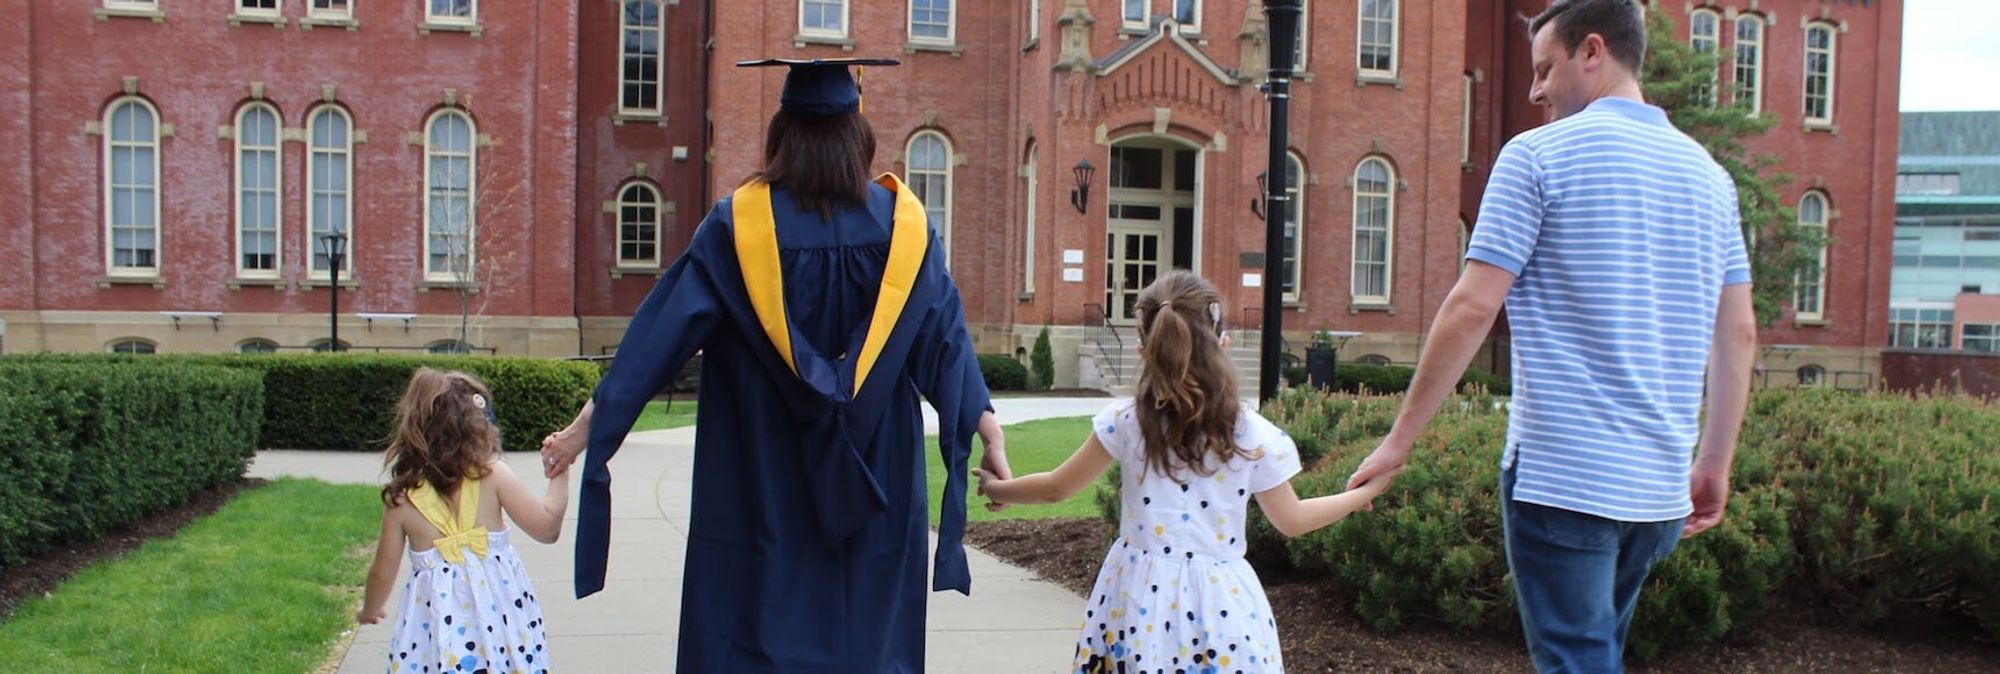 WVU family walking holding hands